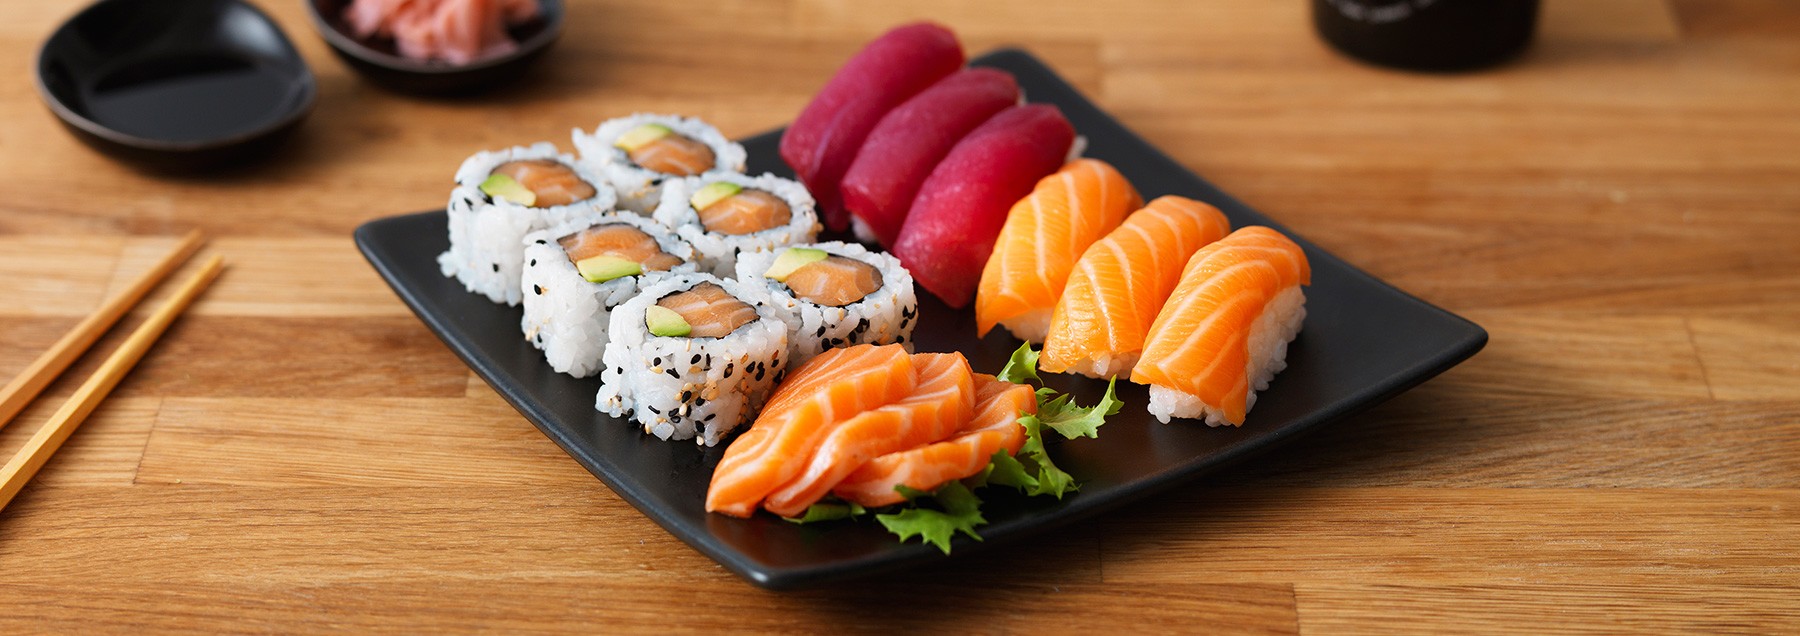 Sushi Delivery in London – You Me Sushi – Sushi Restaurants in London